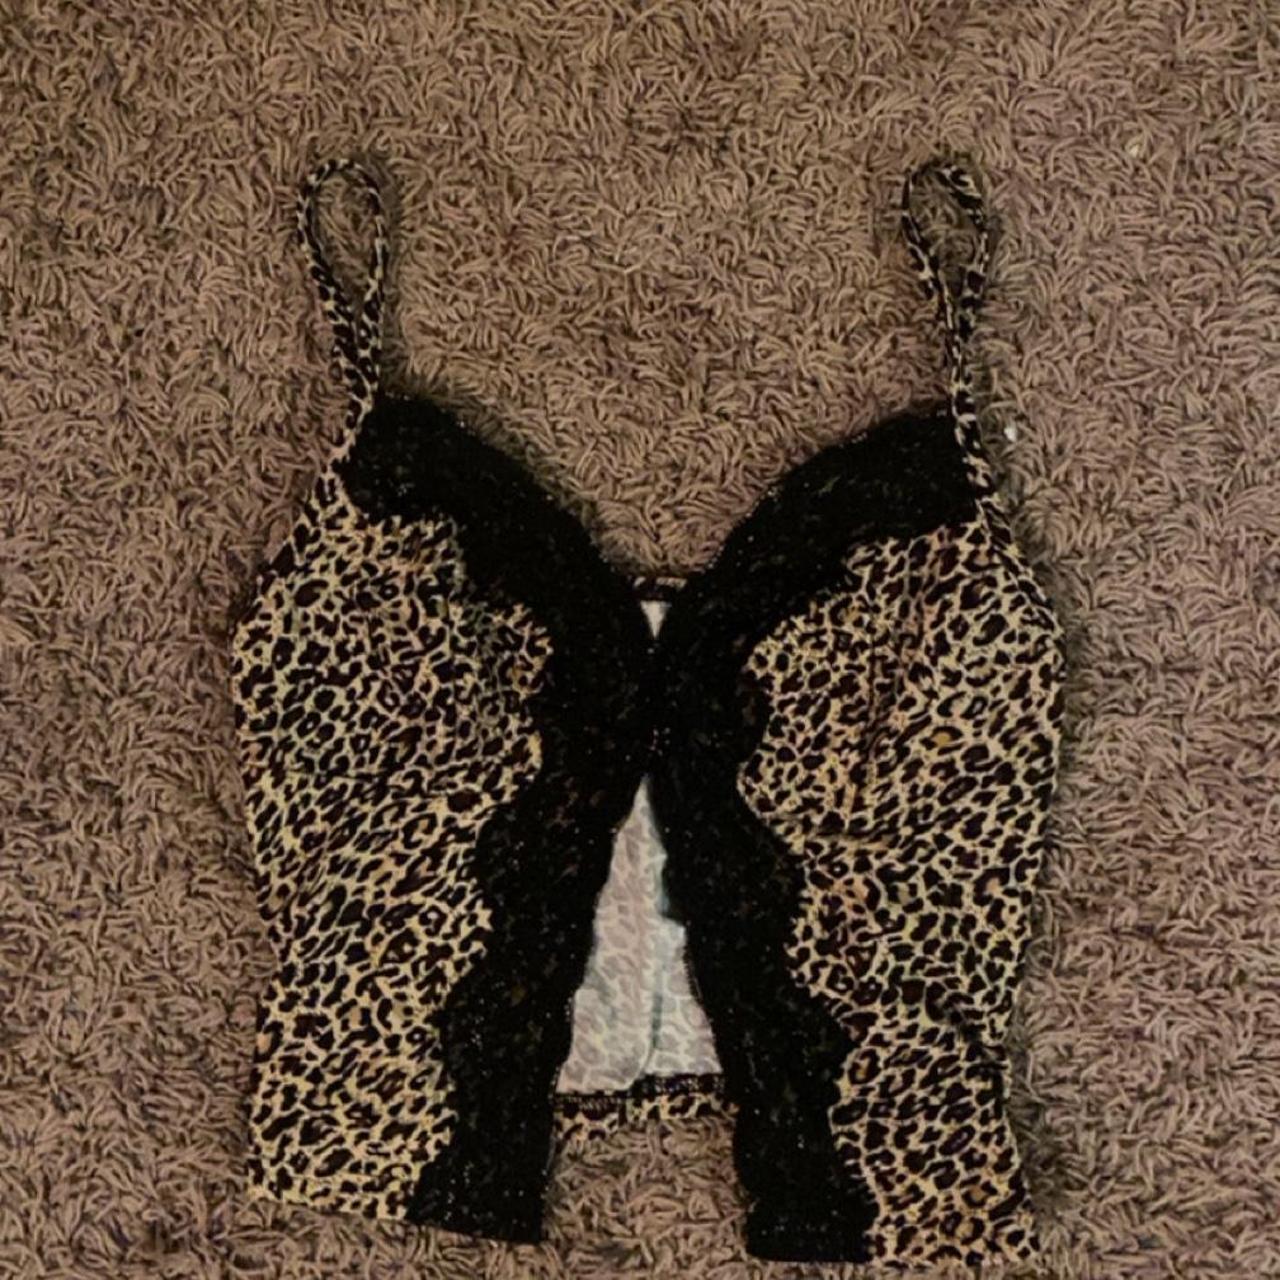 Three Lively bras! Only wore the leopard print one - Depop